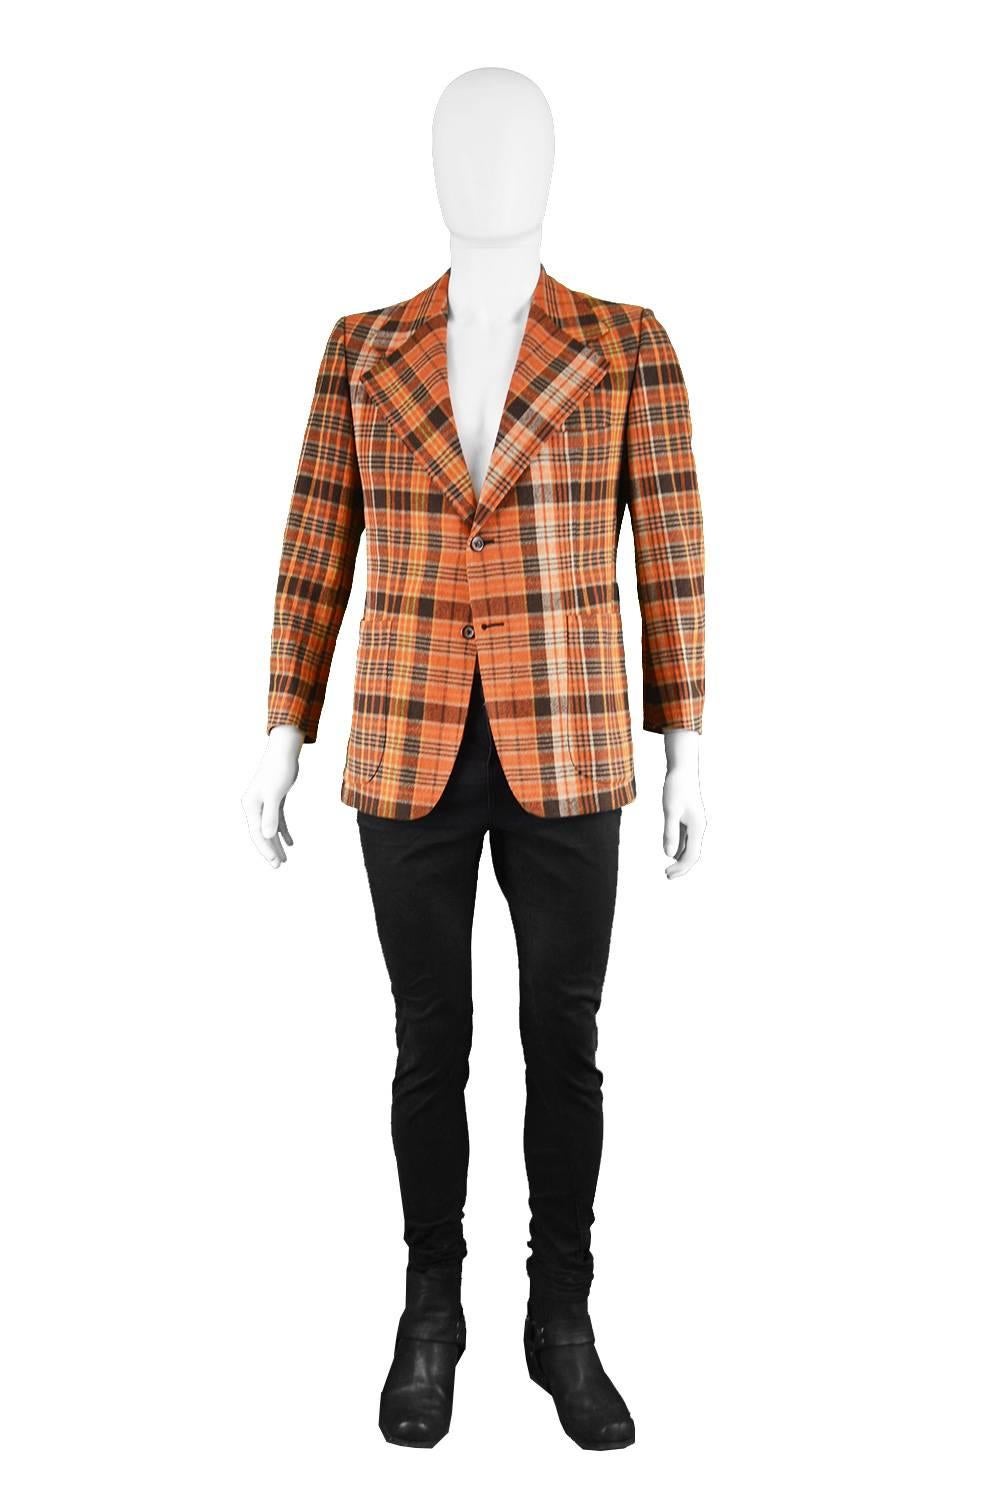 Pierre Cardin Boutique Men's Orange Tartan Checked Vintage Sport Coat, 1970s

Estimated Size: Men's Small. Would suit a shorter man due to shorter sleeves. Please Check measurements. 
Chest - 40” / 101cm (allow a couple of inches room for